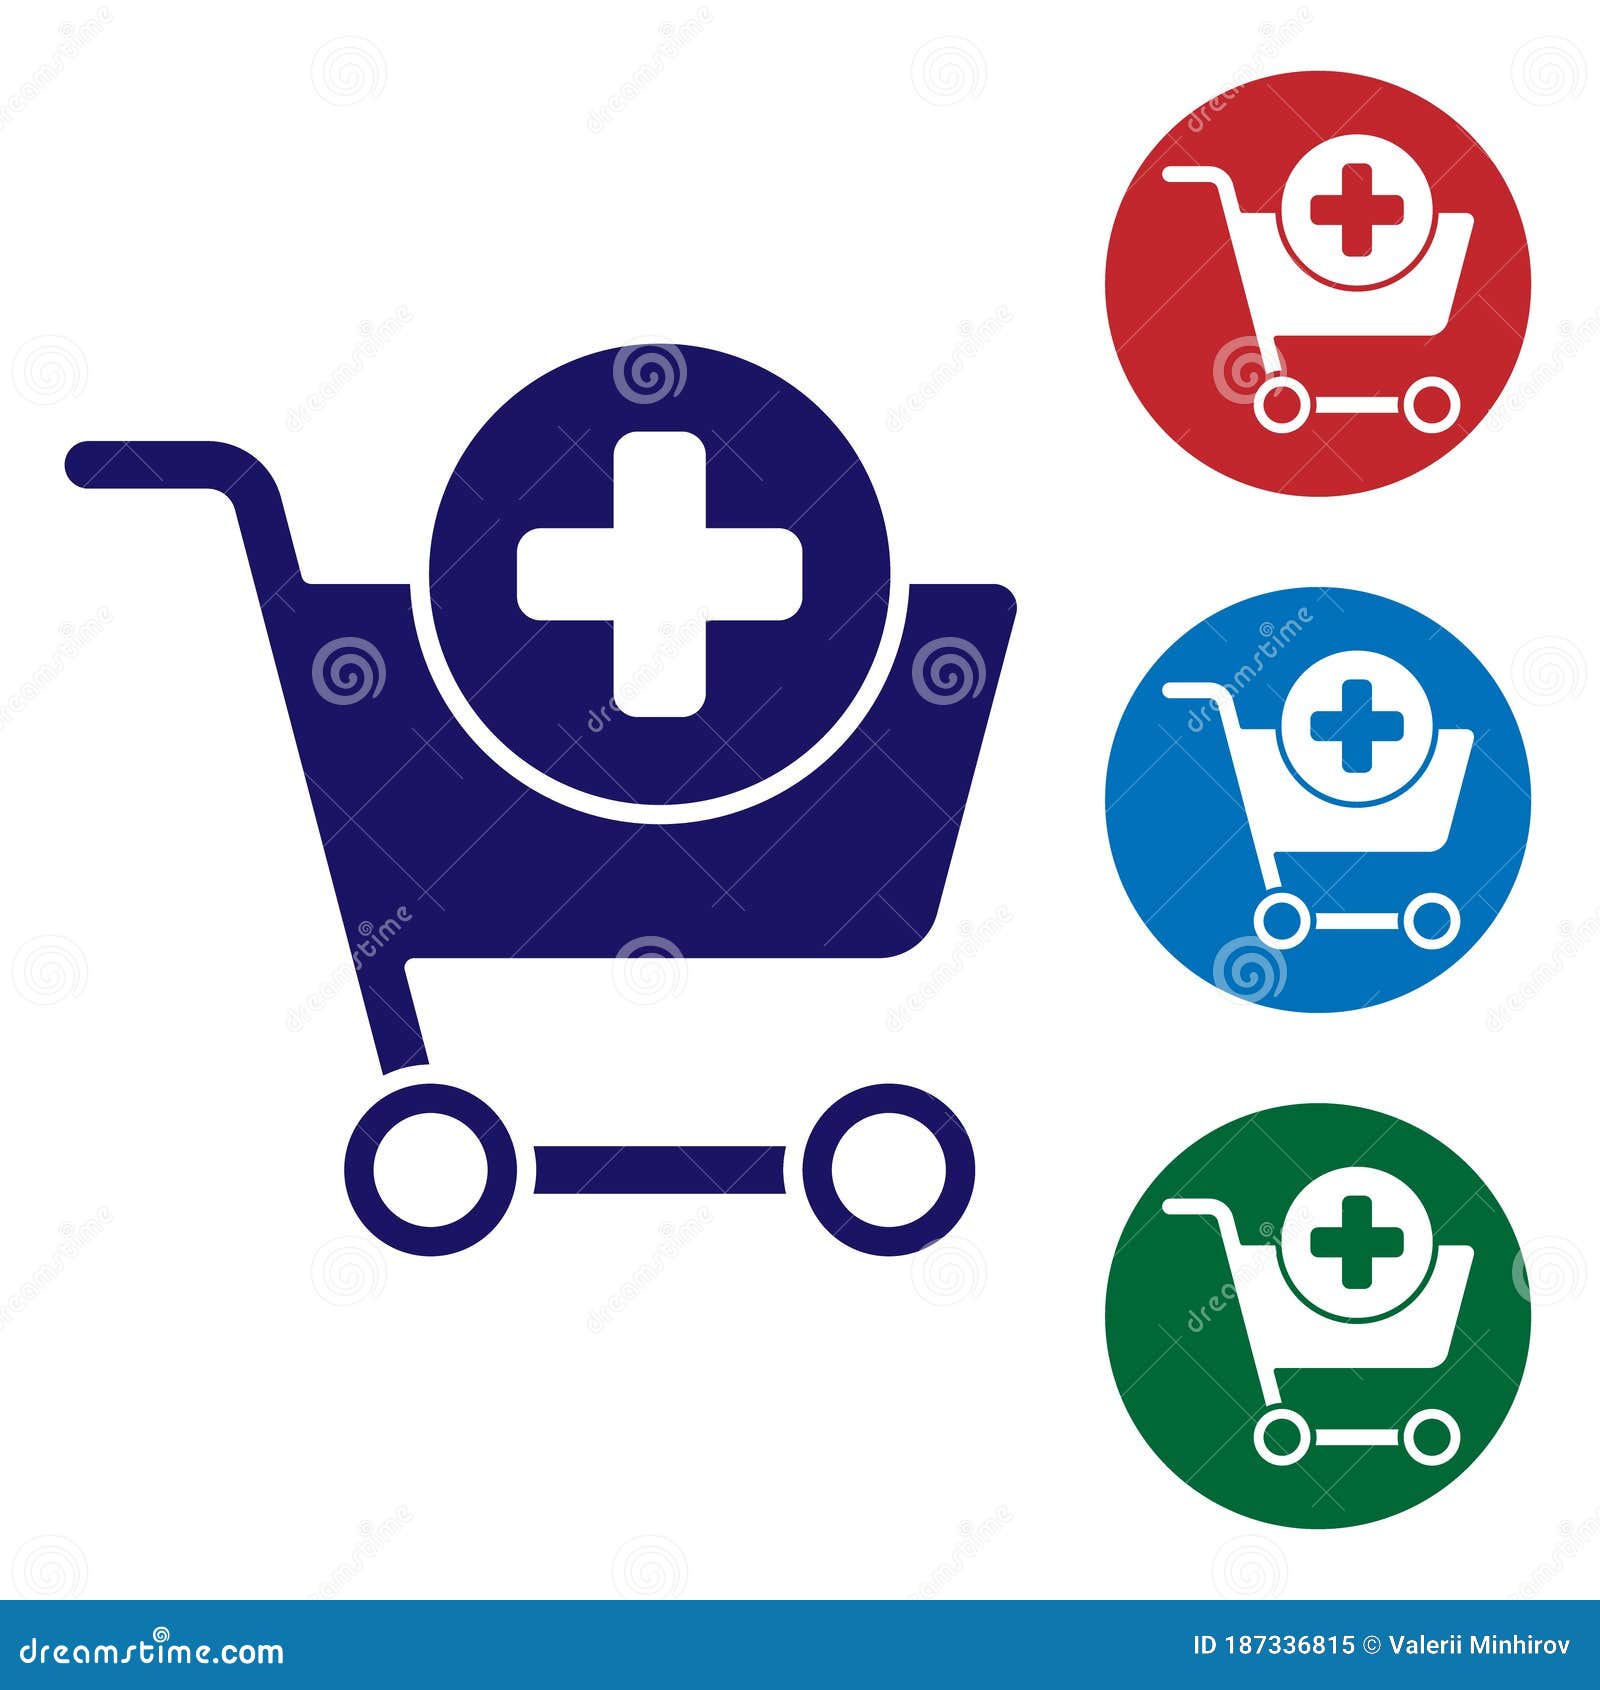 Blue Add To Shopping Cart Icon Isolated on White Background. Online Buying  Concept. Delivery Service Sign Stock Vector - Illustration of ecommerce,  element: 187336815